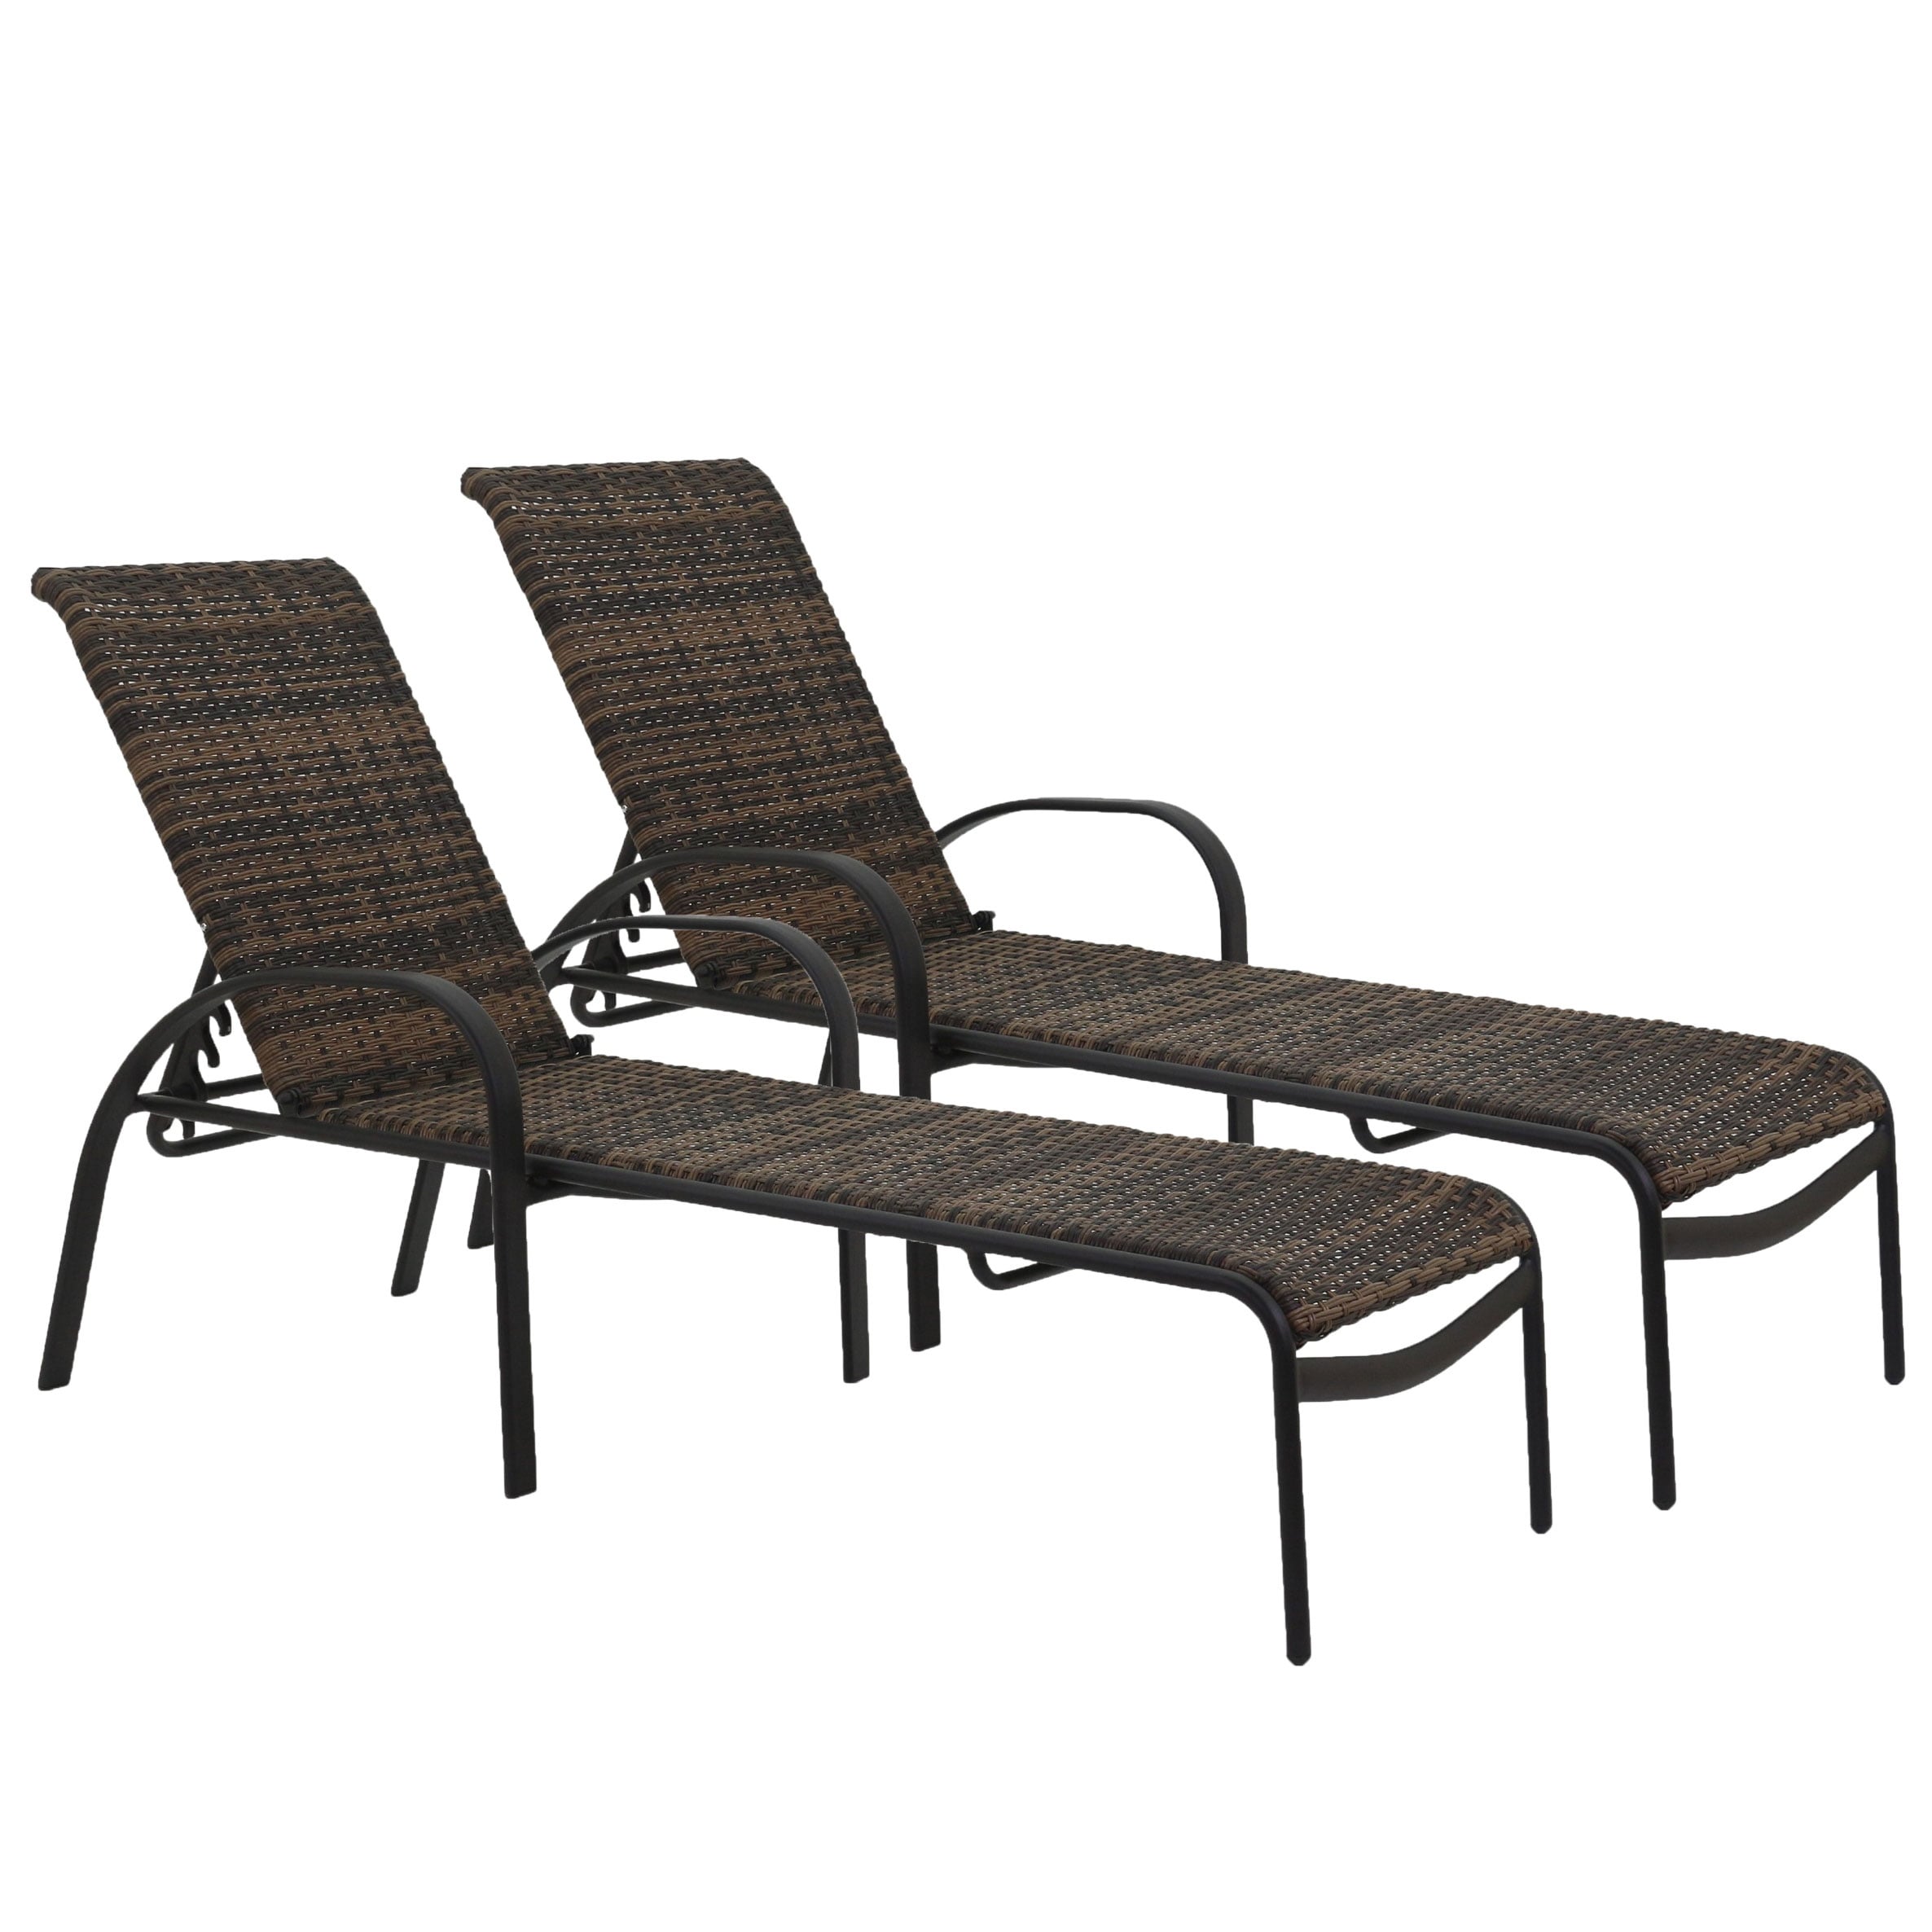 Courtyard Casual Santa Fe Wicker Aluminum Chaise Lounge Price Set Of 2